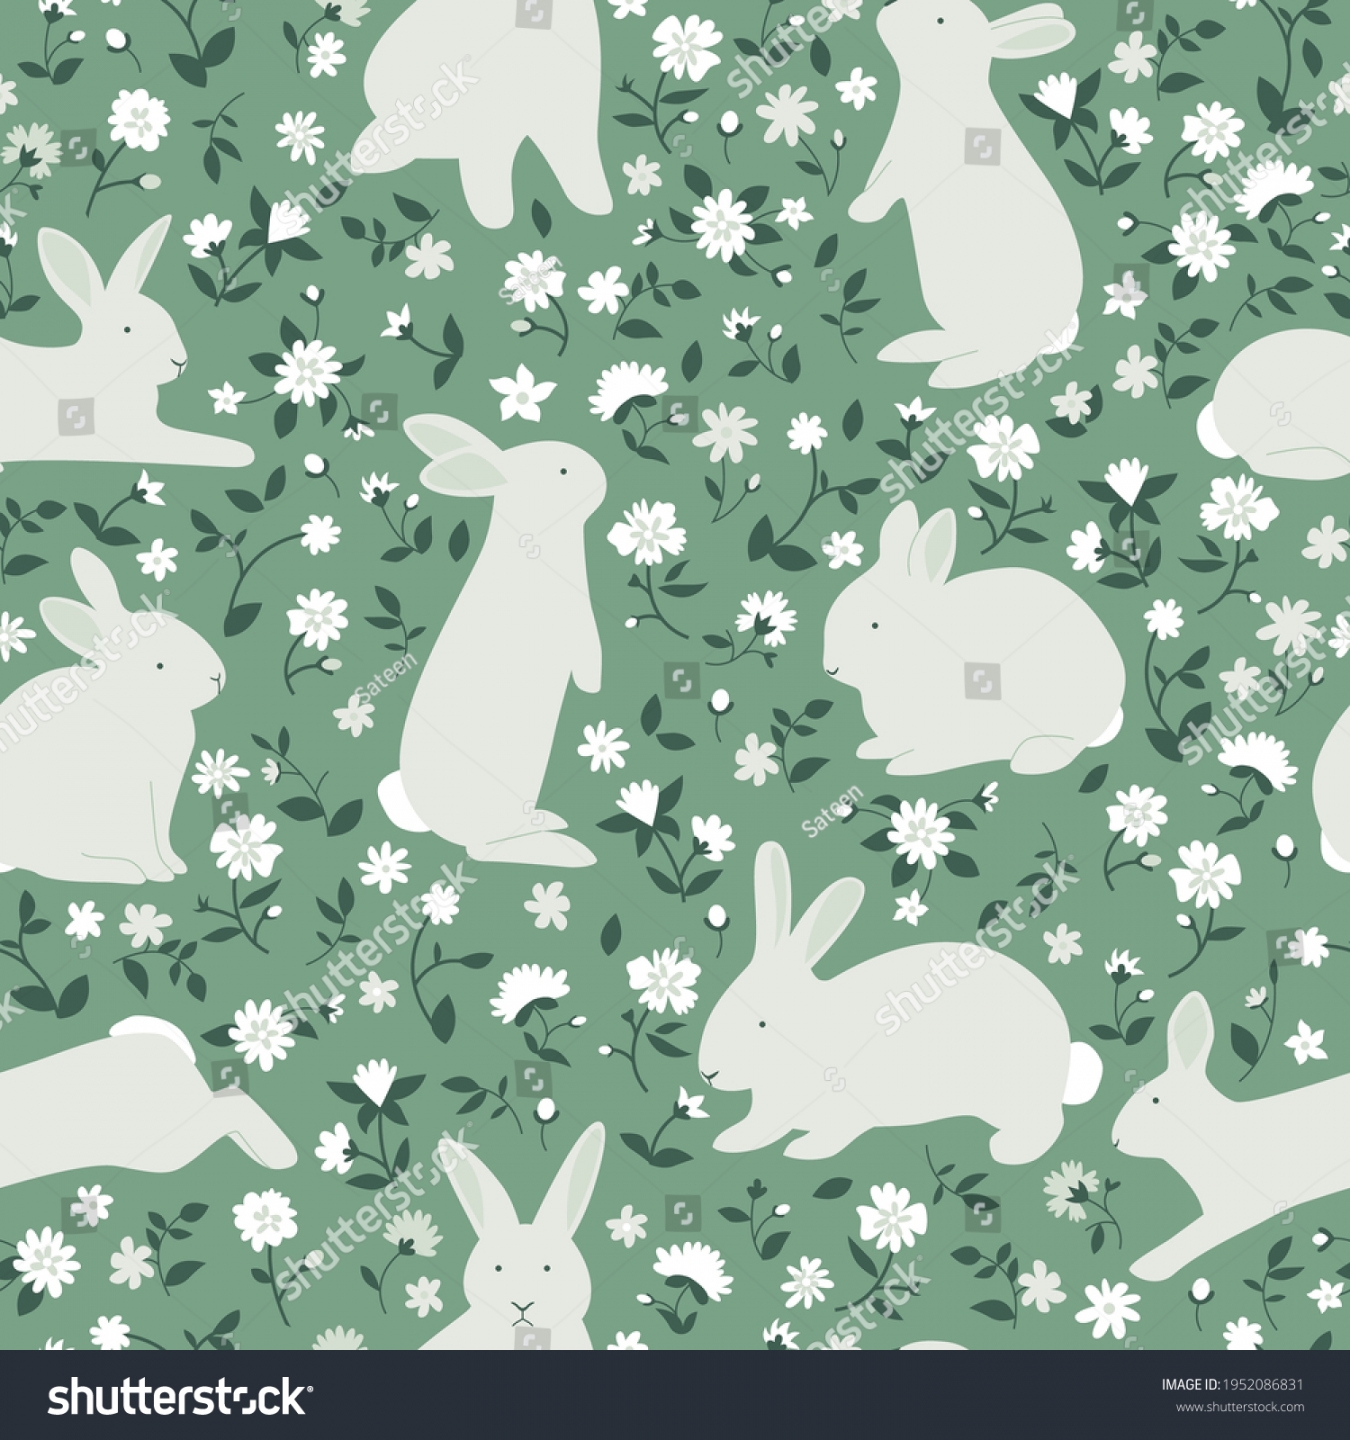 ,0 Bunny Repeat Images, Stock Photos & Vectors  Shutterstock - FREE Printables - Rabbit Pattern